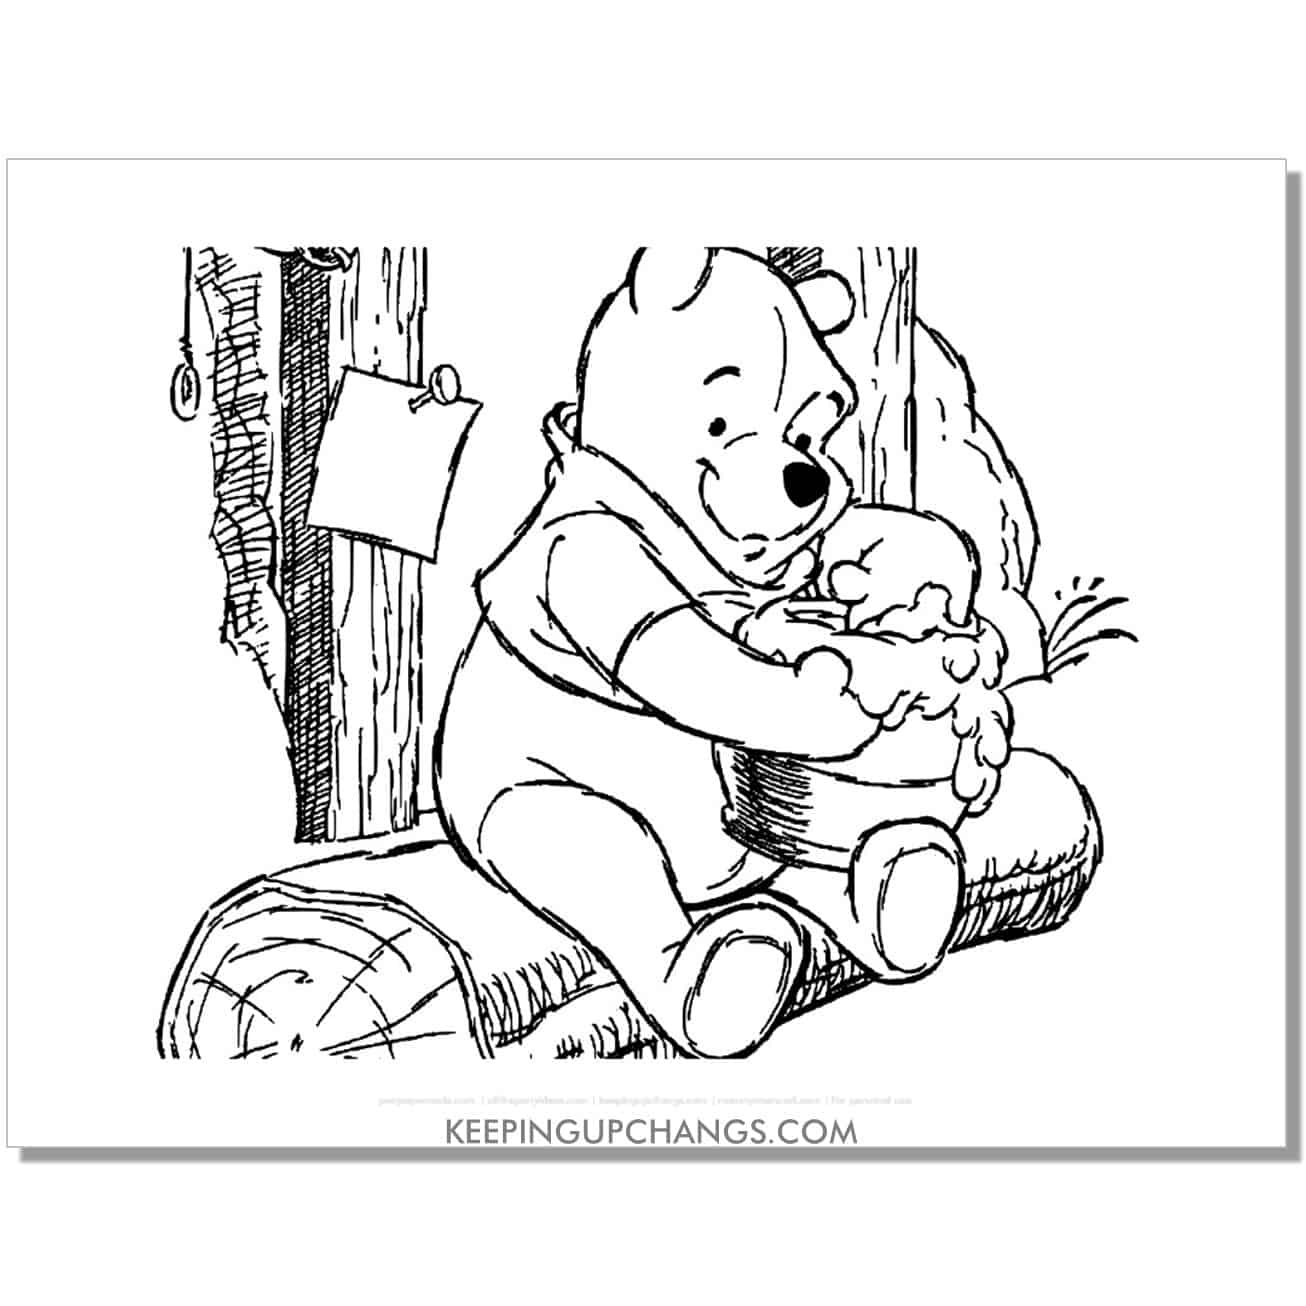 winnie the pooh sitting on log with honey pot coloring page, sheet.